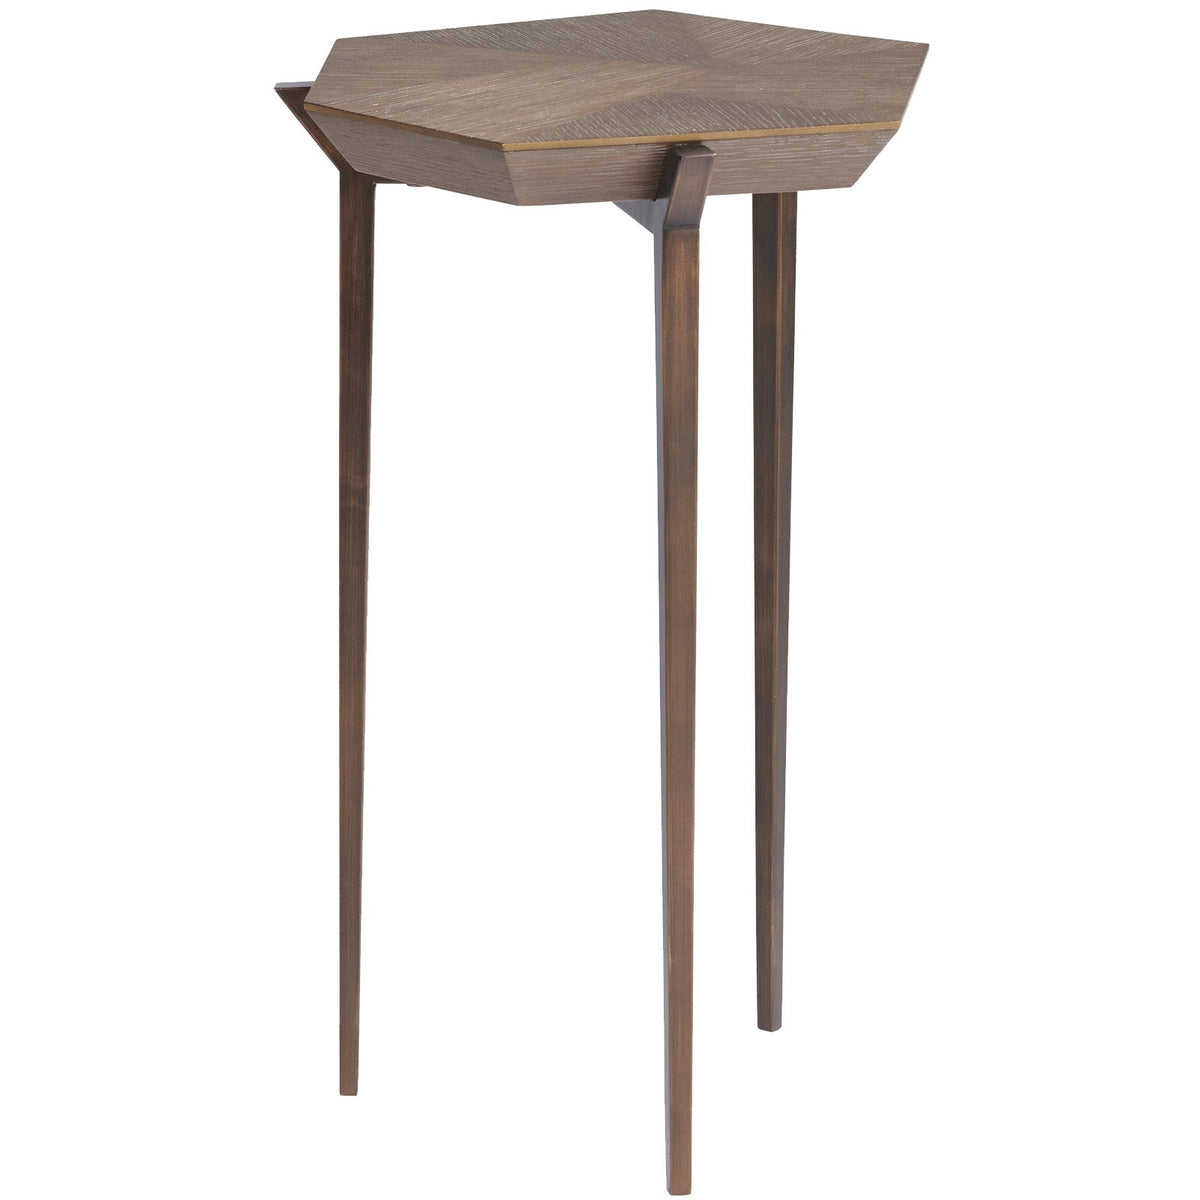 Divergence Chairside Table